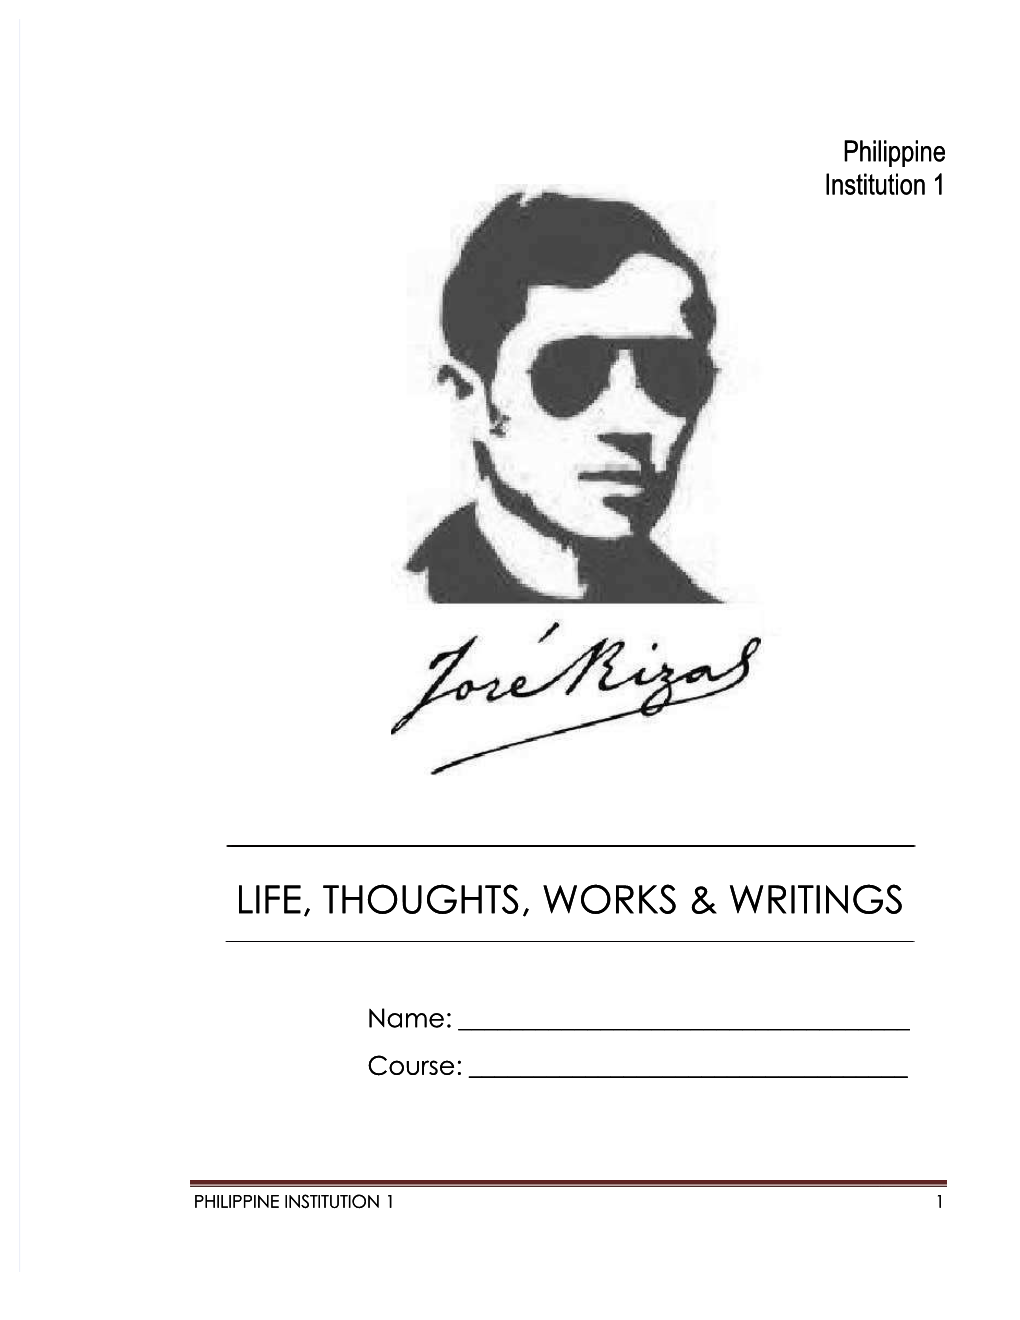 Life, Thoughts, Works & Writings